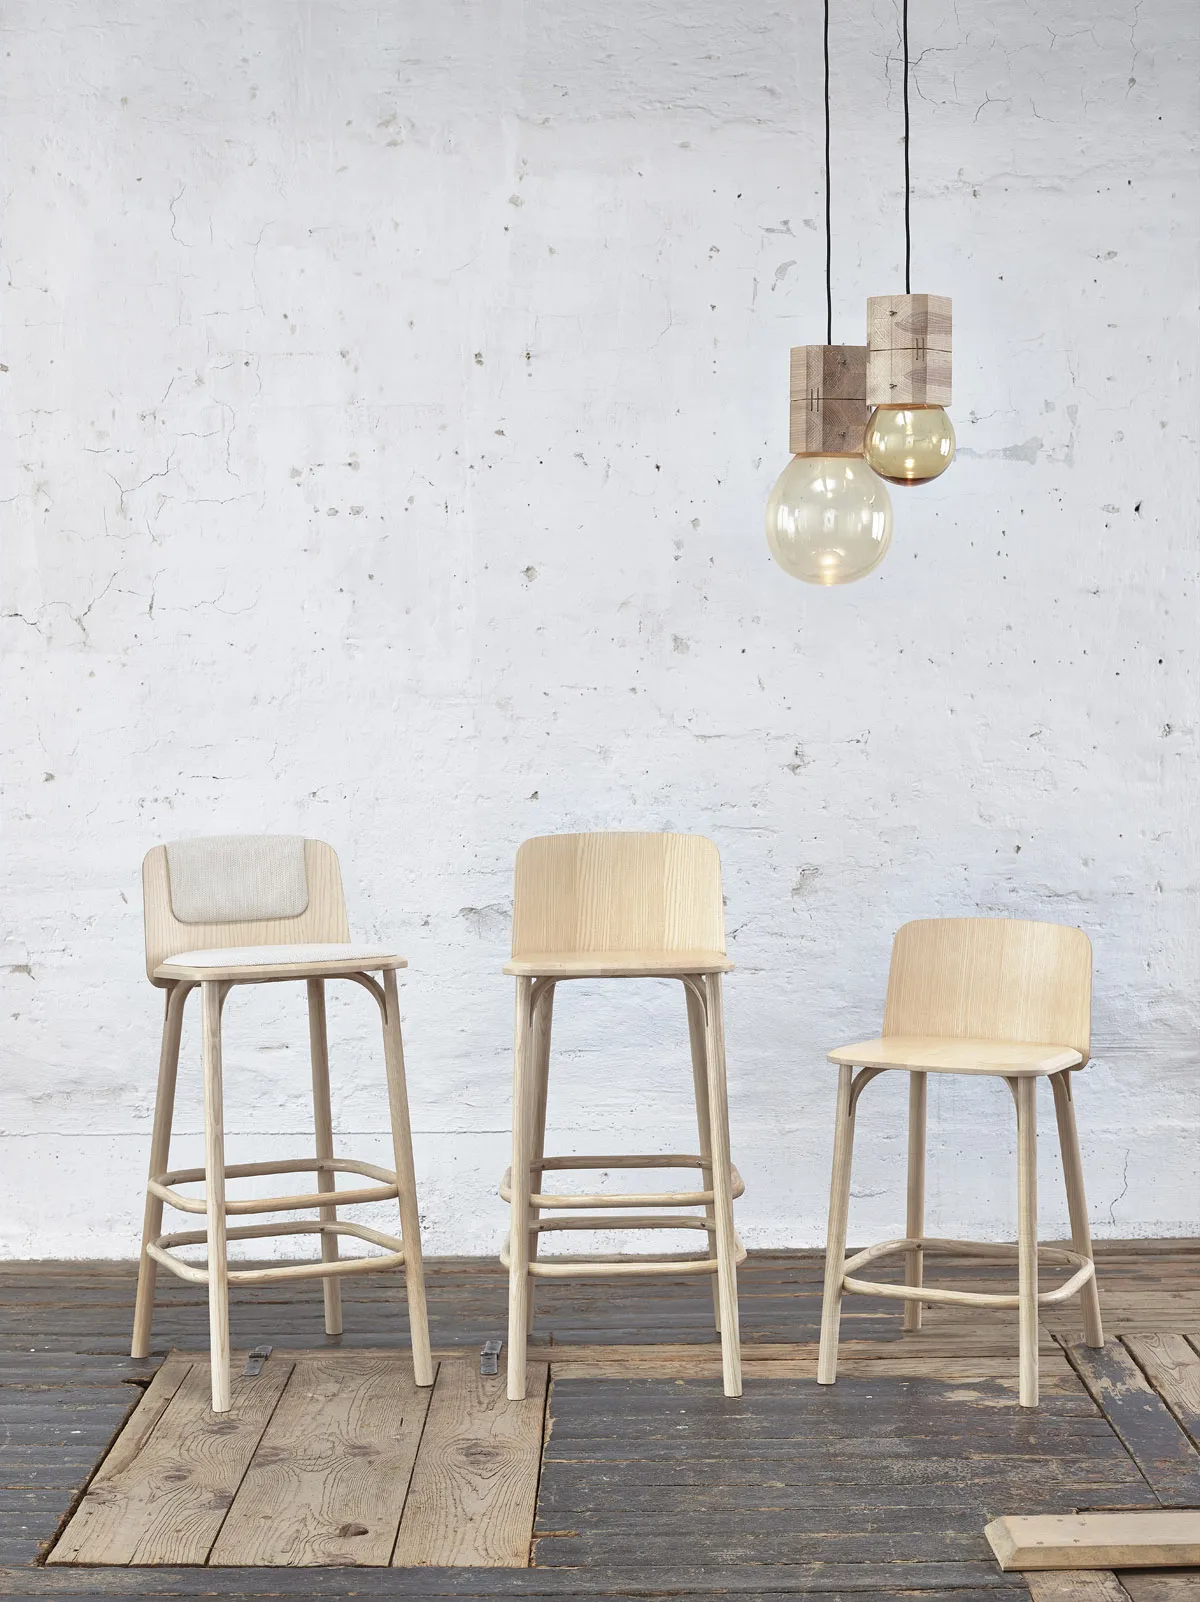 Three wooden bar stools of varying heights positioned on rustic wooden flooring against a textured white wall, accentuated by two hanging pendant lights with wooden fixtures and clear glass bulbs.